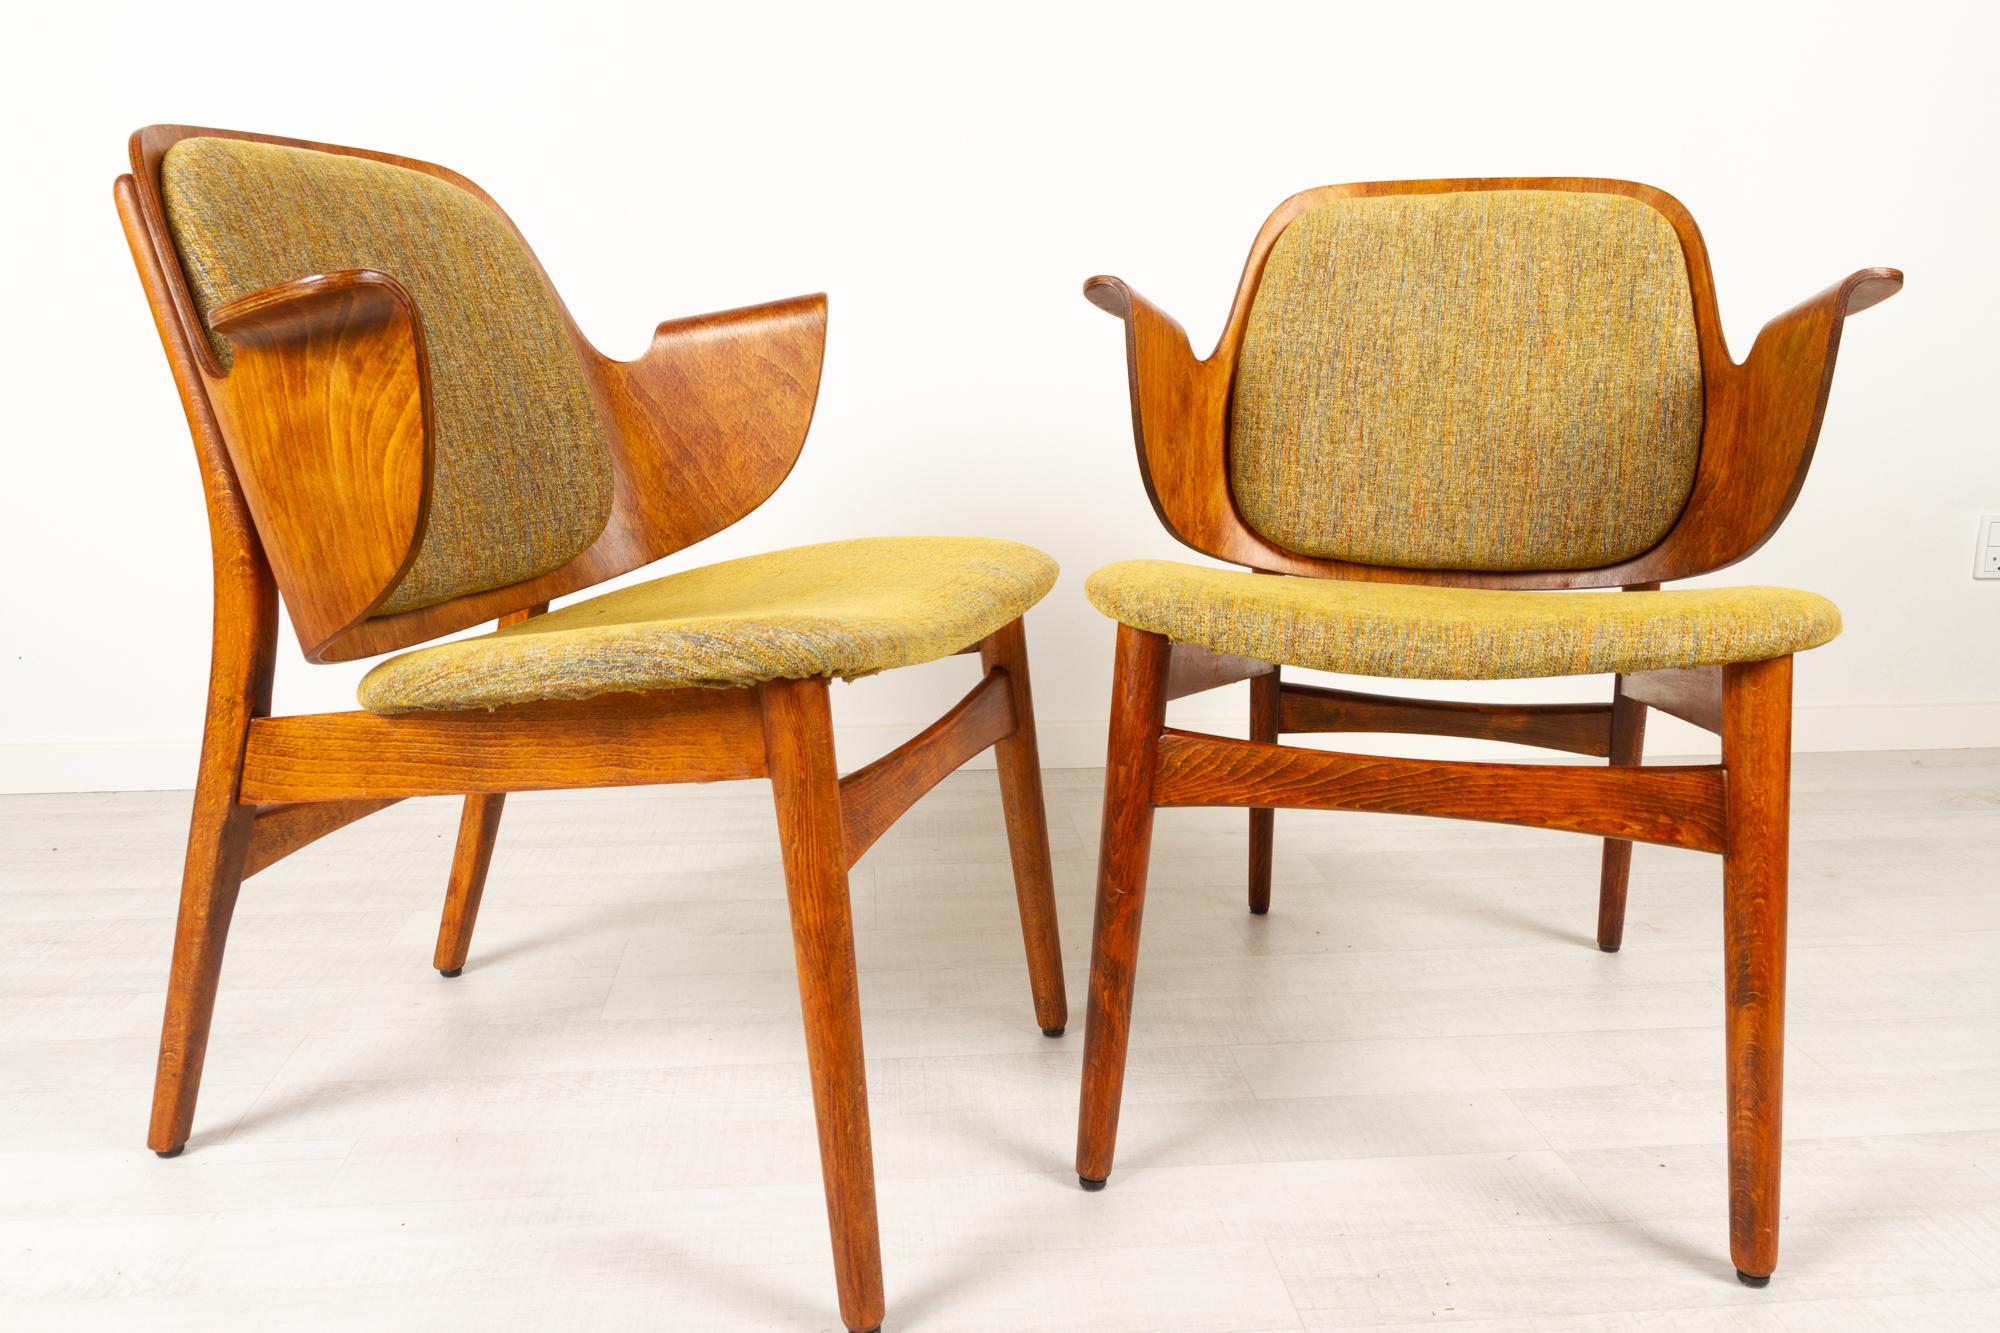 Vintage Danish pair of armchairs by Hans Olsen for Bramin 1950s
Pair of Danish Mid-Century Modern Model 107 lounge shell chairs in stained oak by Danish architect Hans Olsen. Back and armrest in one piece of shaped laminated wood. Seat and back